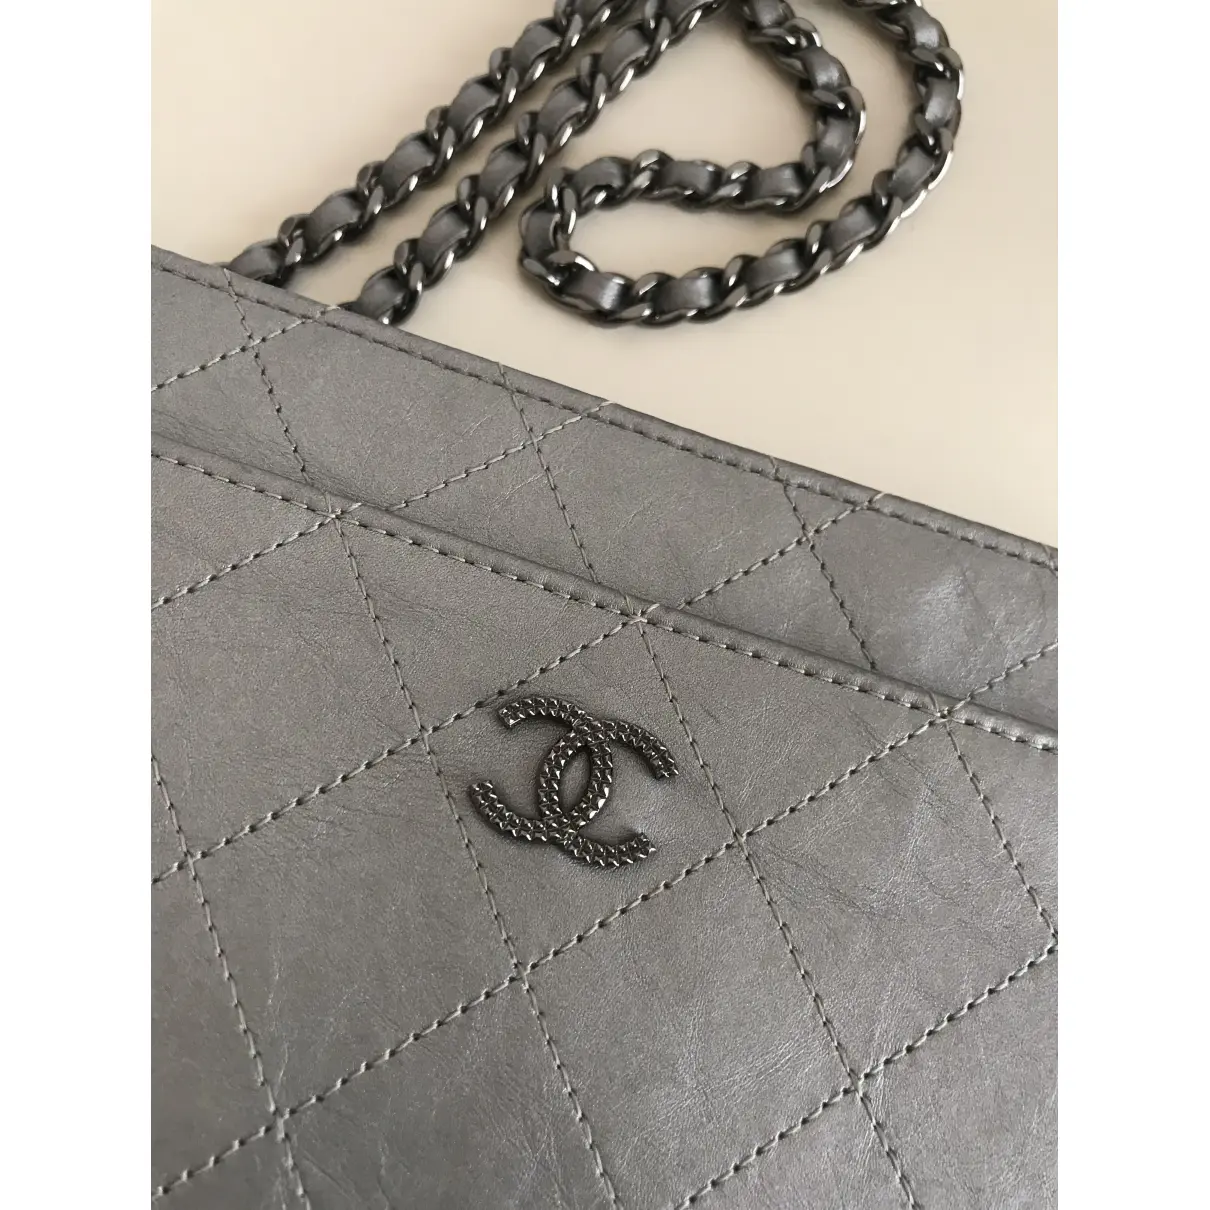 Wallet On Chain Timeless/Classique leather crossbody bag Chanel